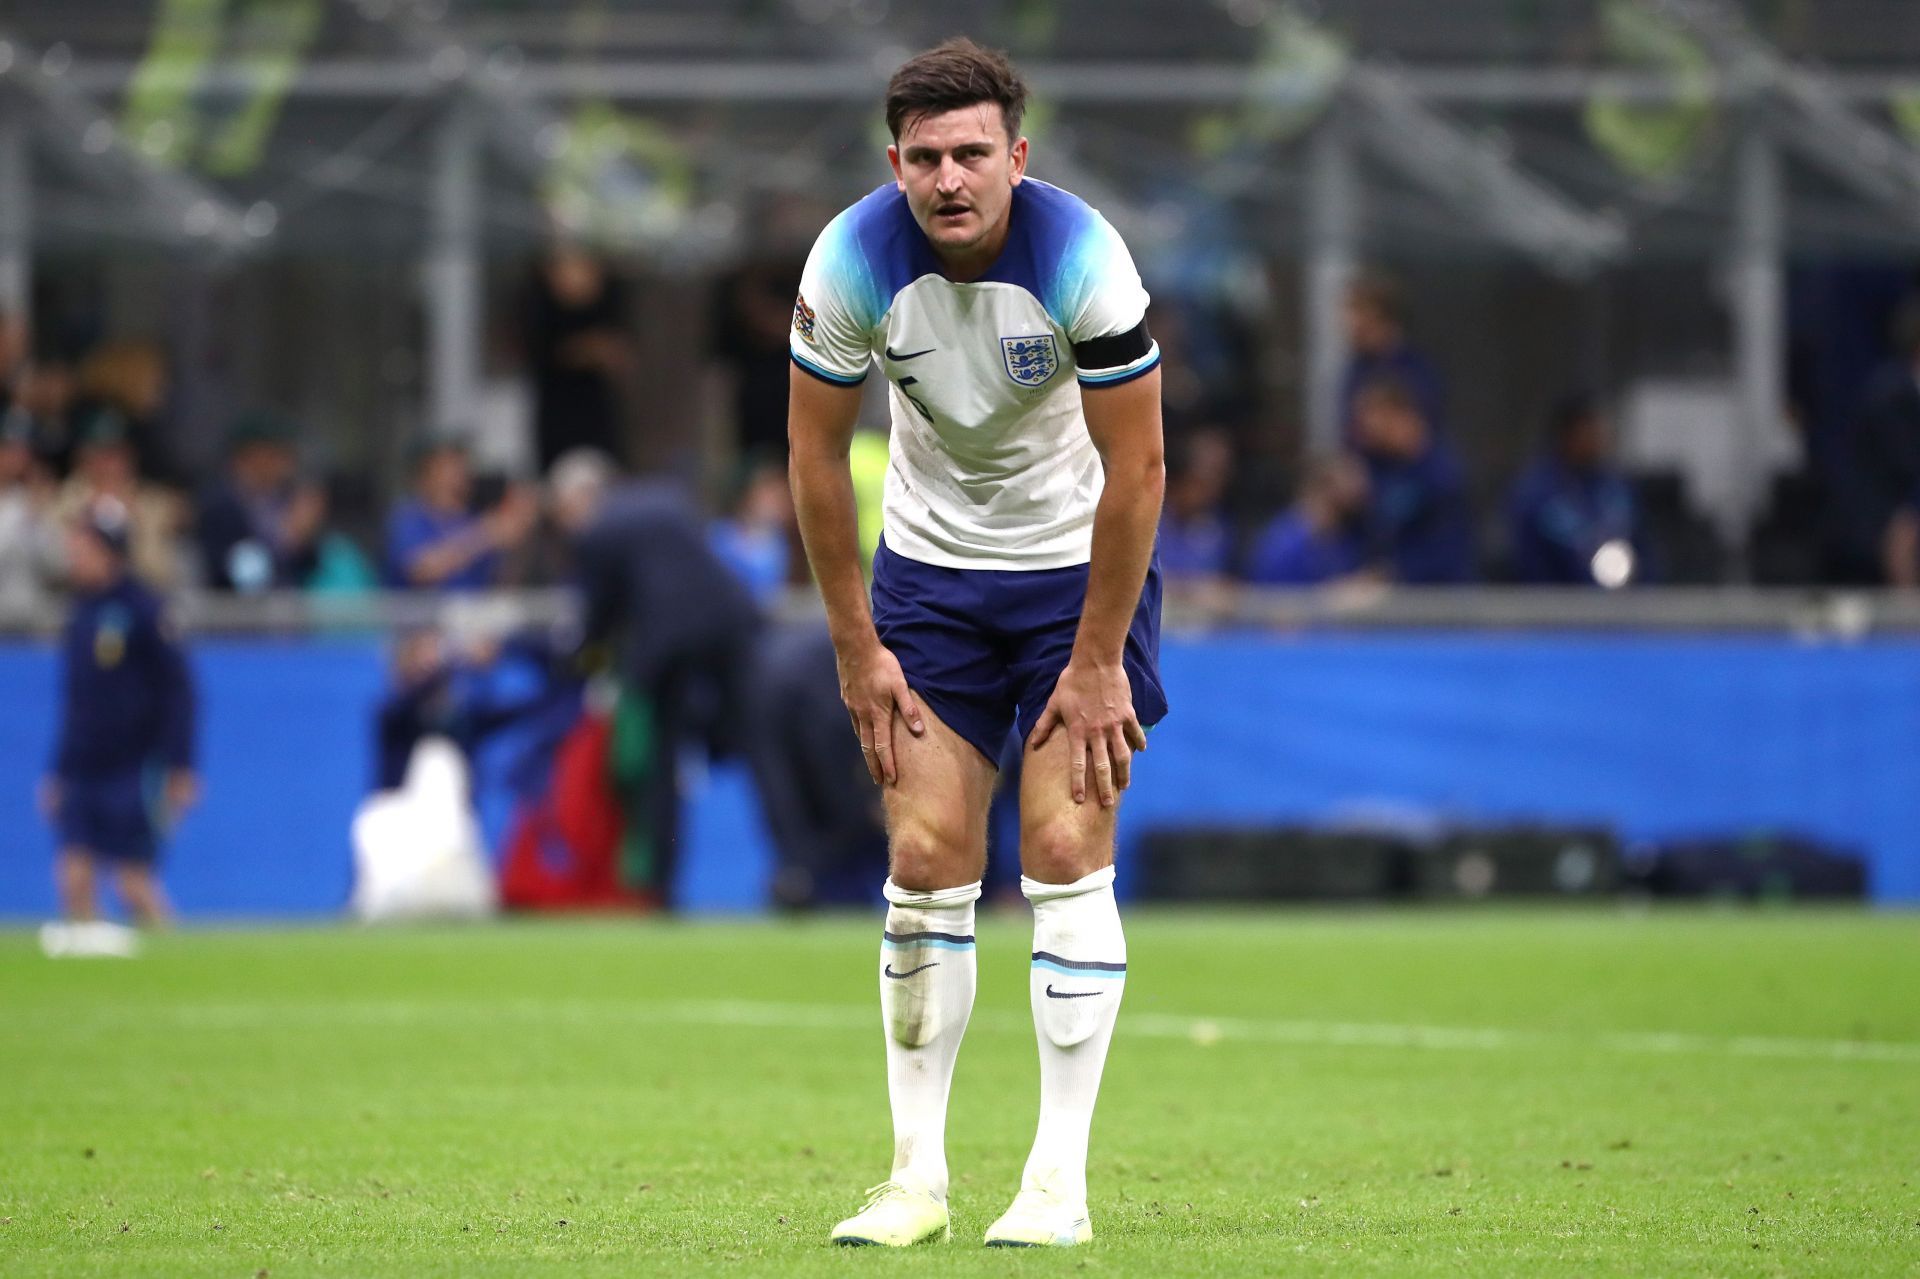 Maguire needs to bounce back when fit again